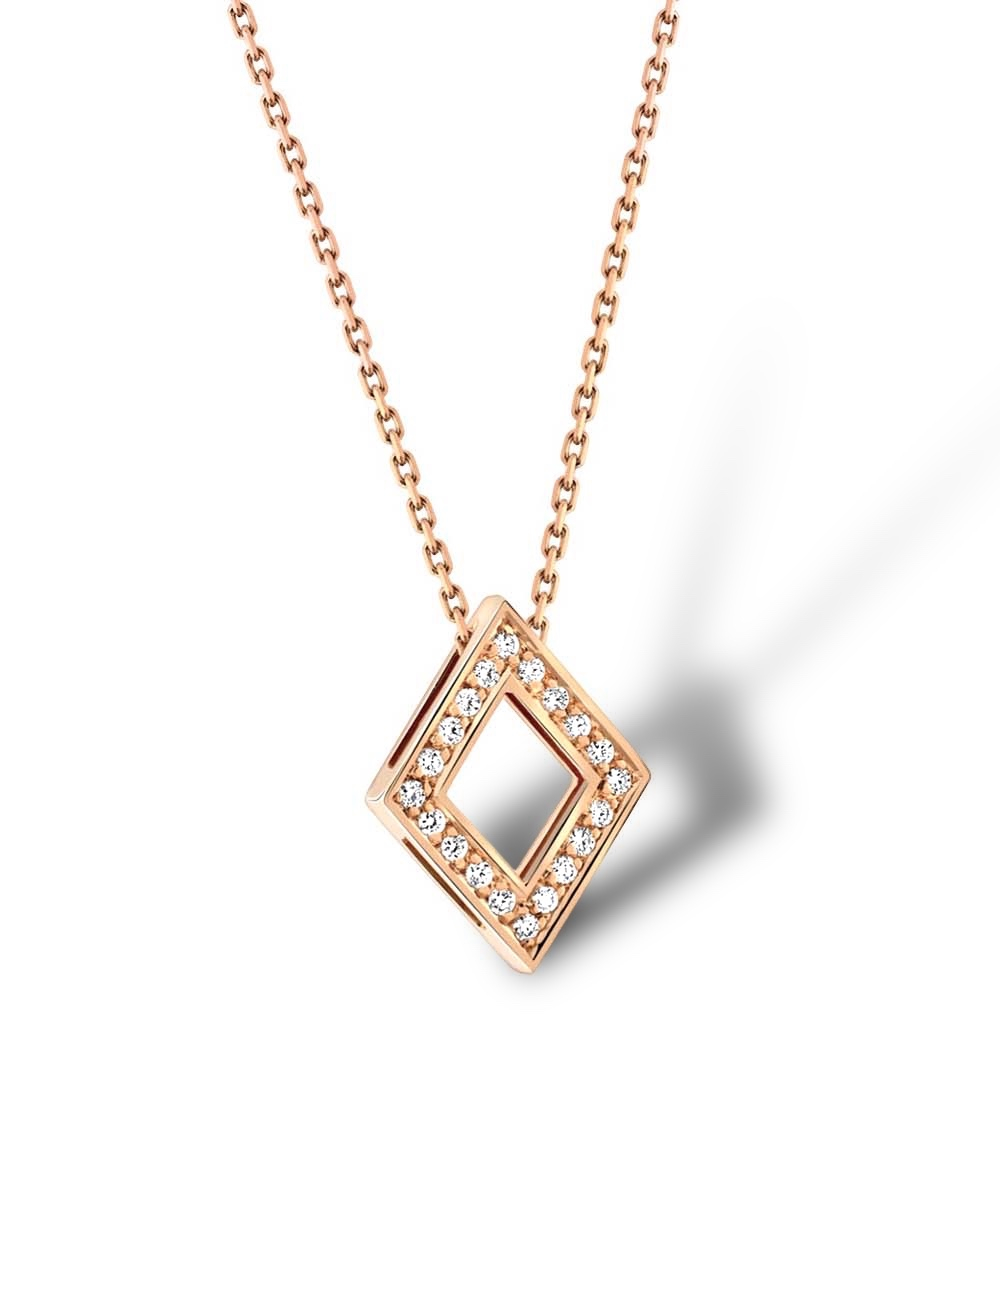 Looking for a jewelry gift? This necklace is in white gold and set with white diamonds in a lozenge shape.